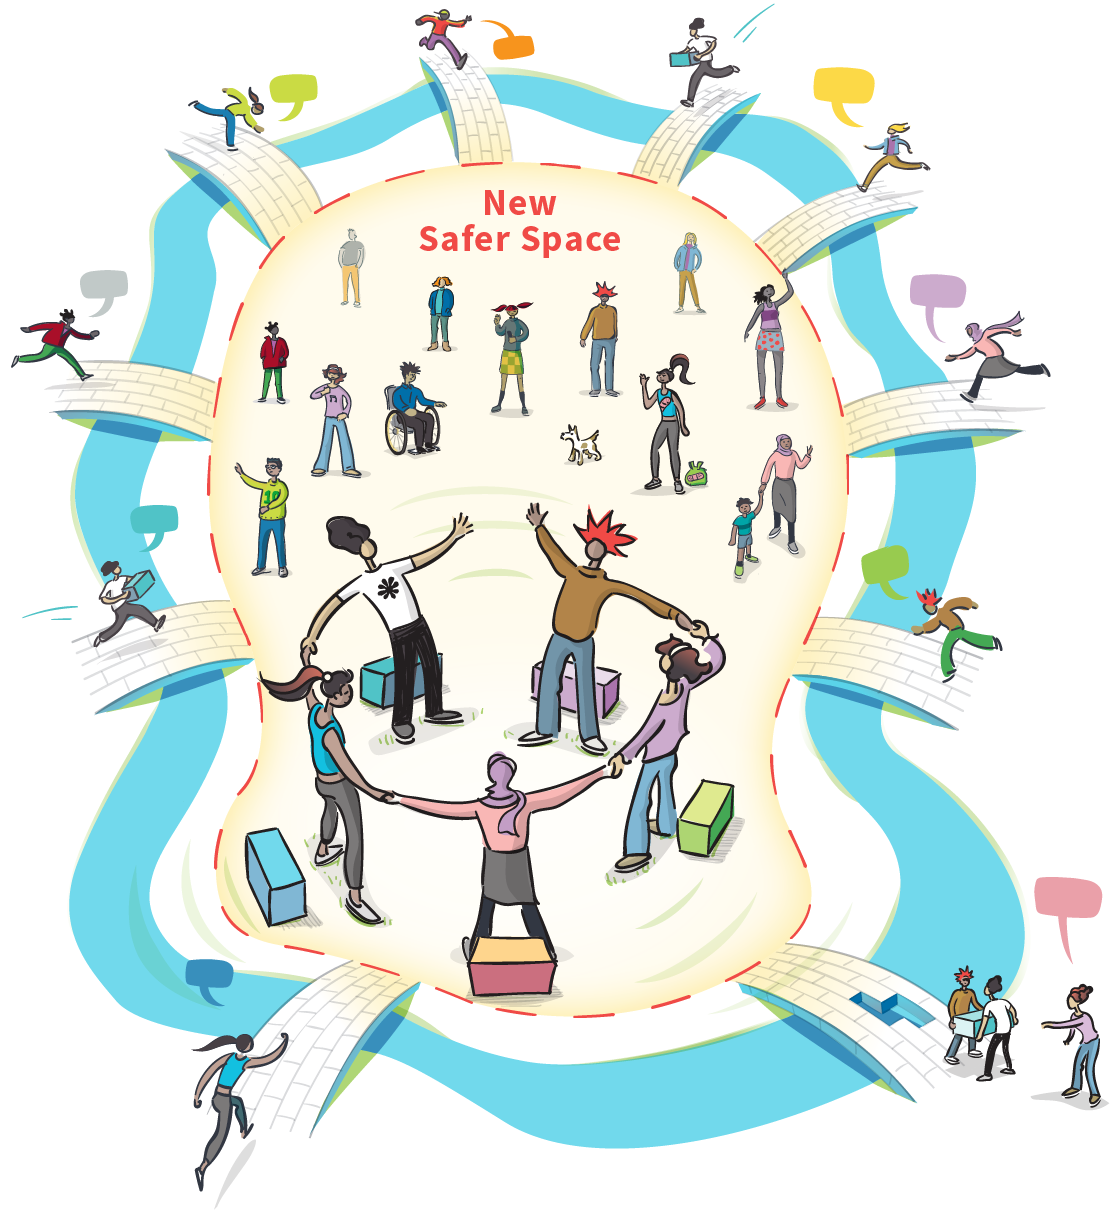 New safer spaces encourage young people to be social and explore their identity in positive ways. A cartoon image showing diverse youth, each crossing their own bridge, to gather in a safer space.